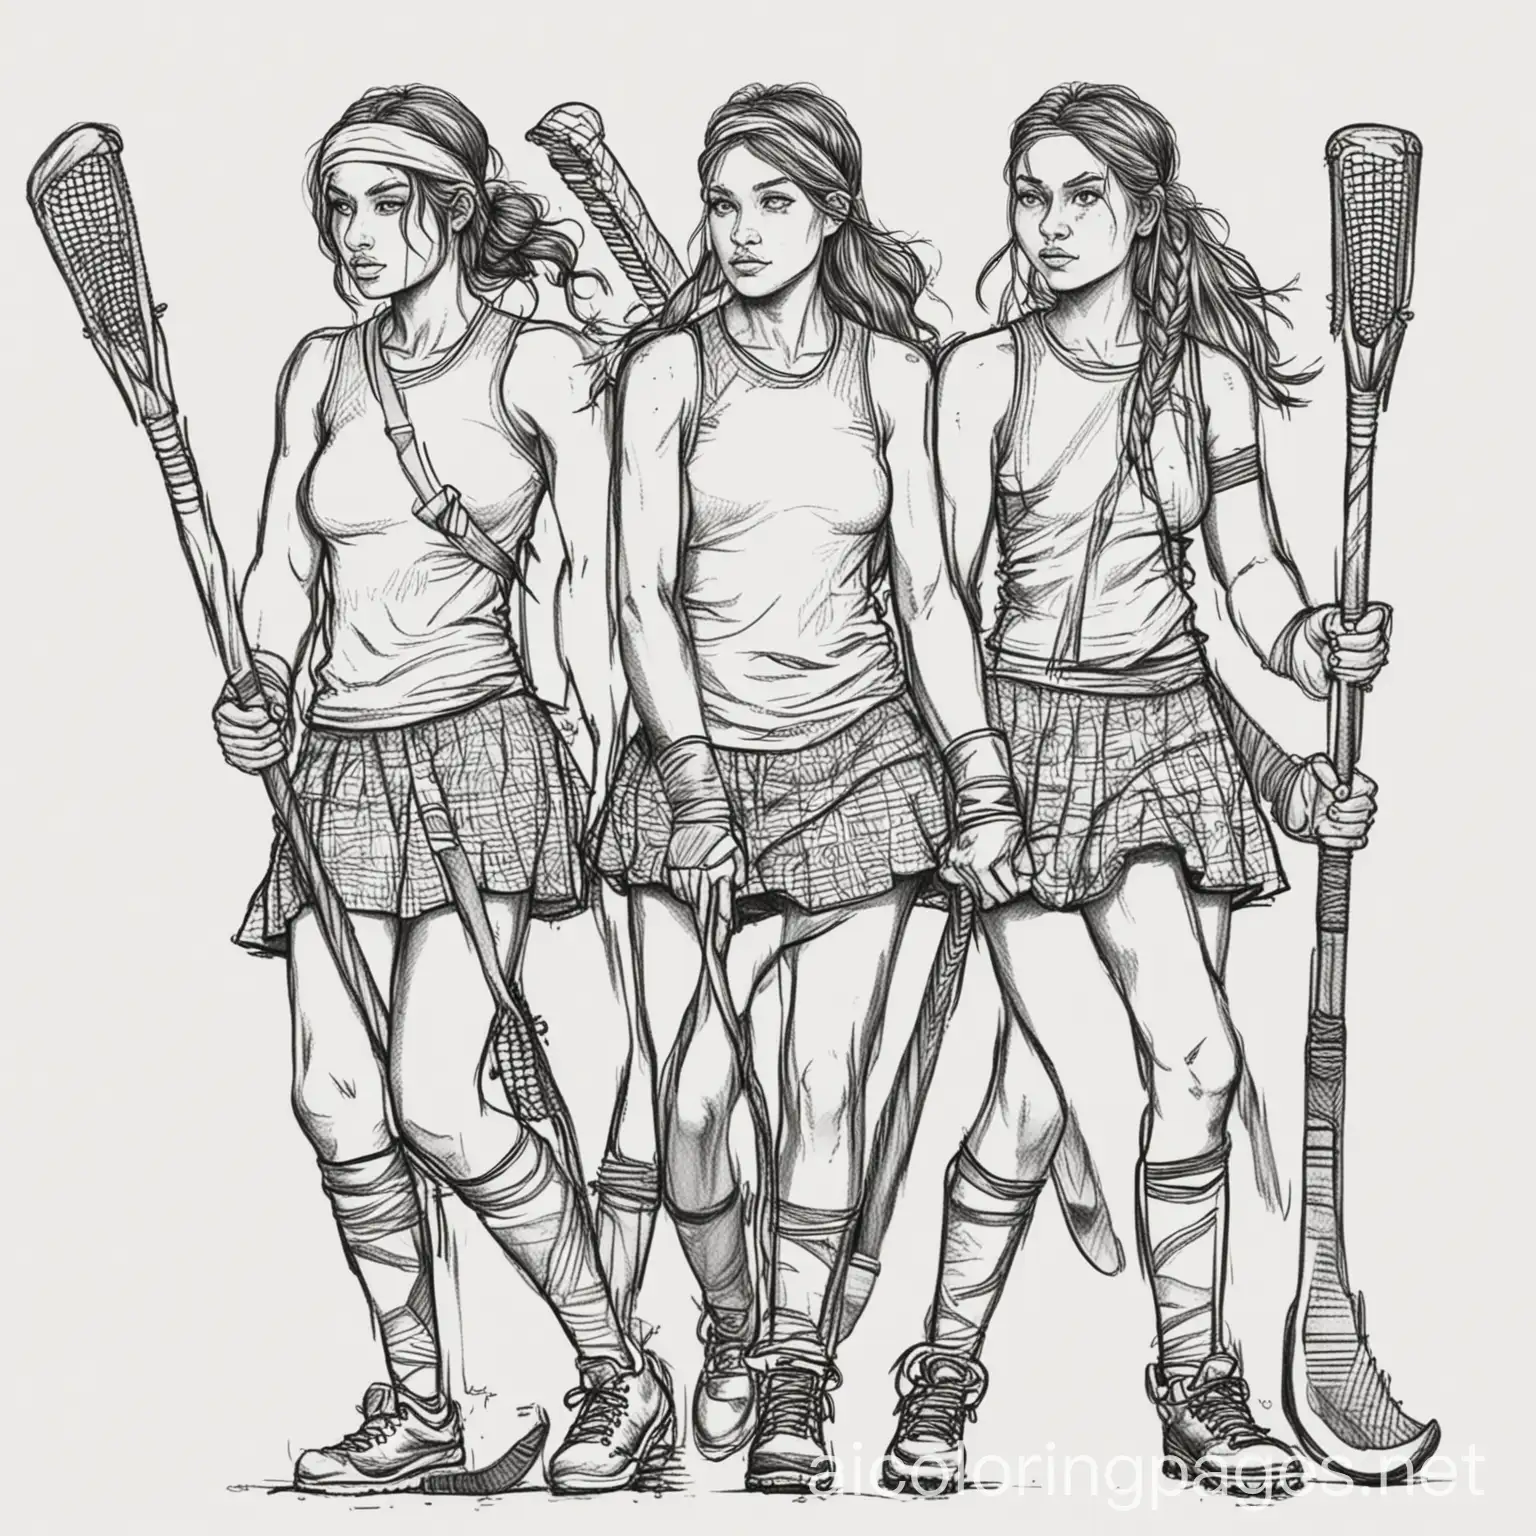 Tribe-of-Women-Fighters-with-Field-Hockey-Sticks-Coloring-Page